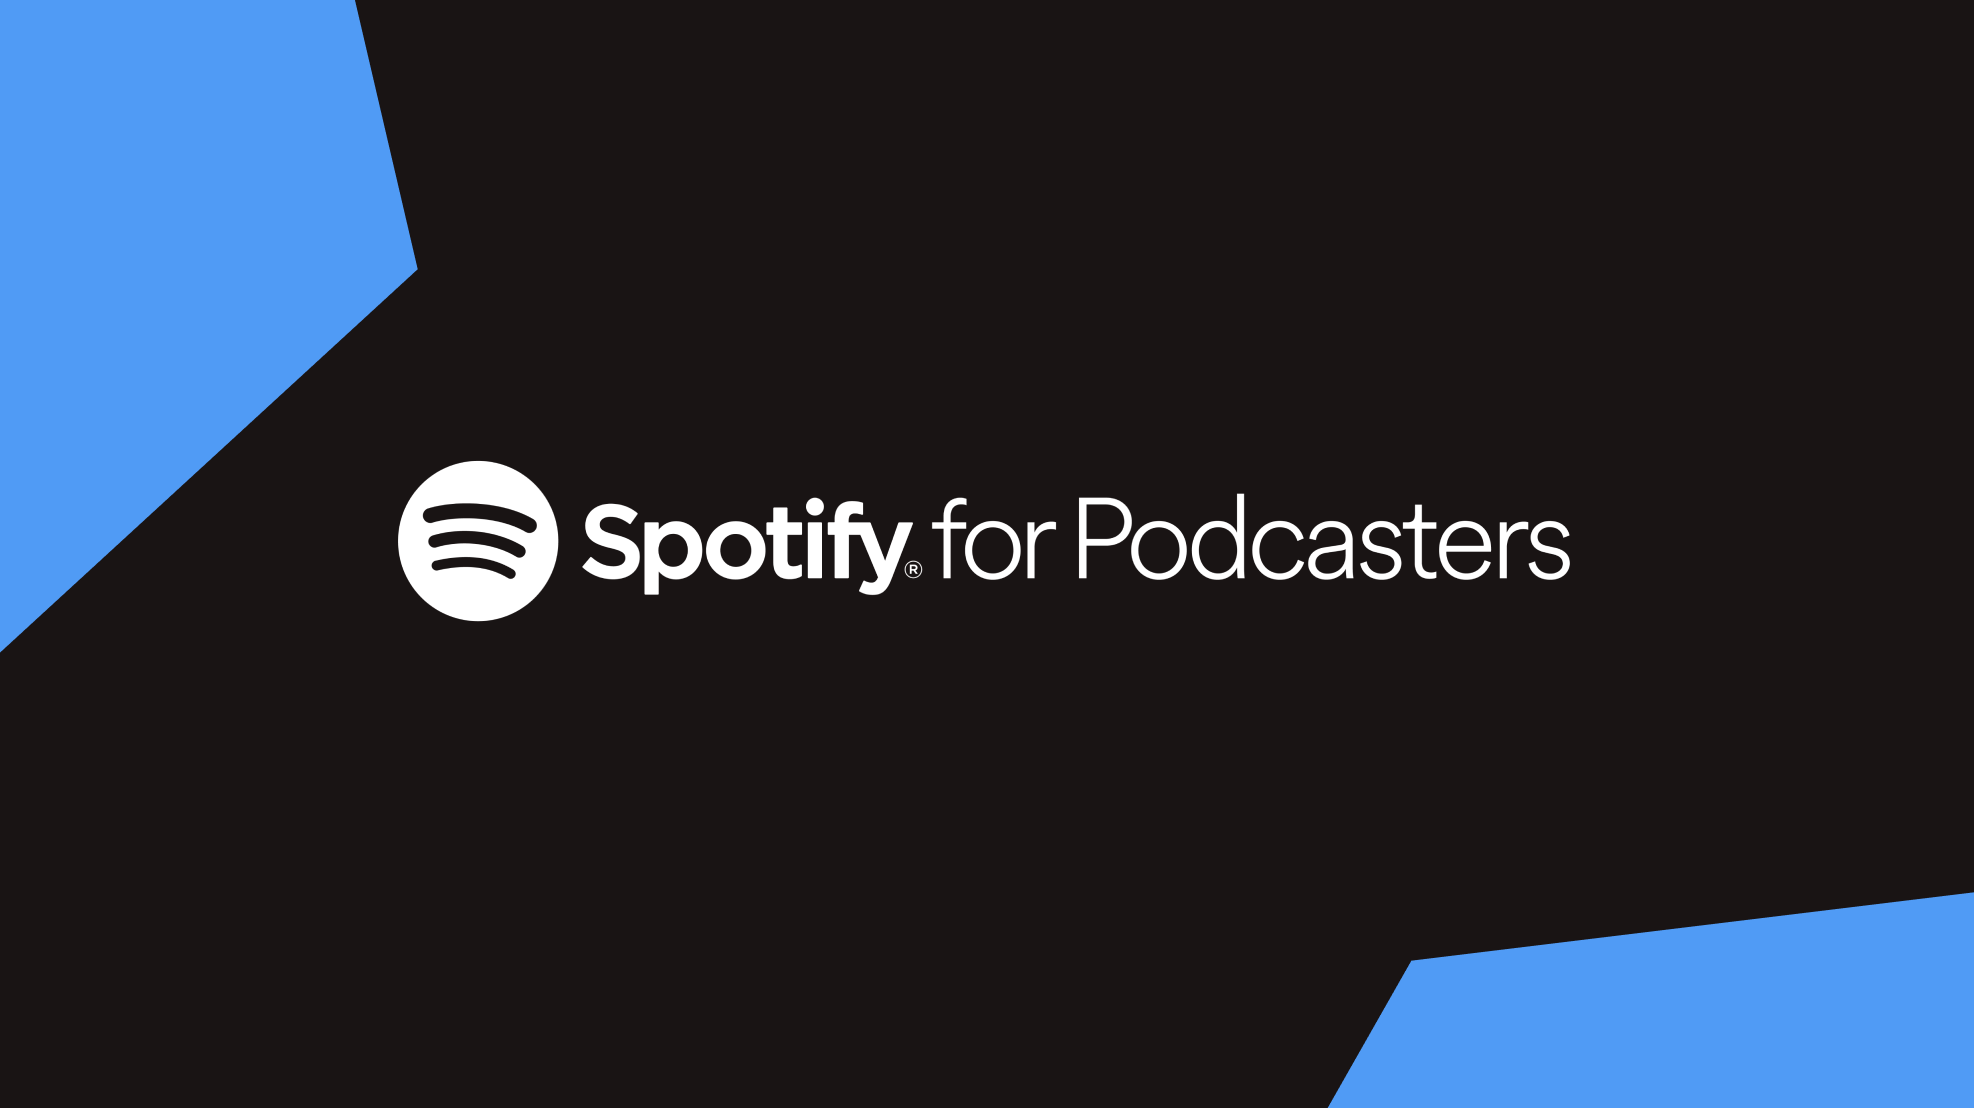 A Spotify survey suggests a potential upcoming Premium Podcast subscription